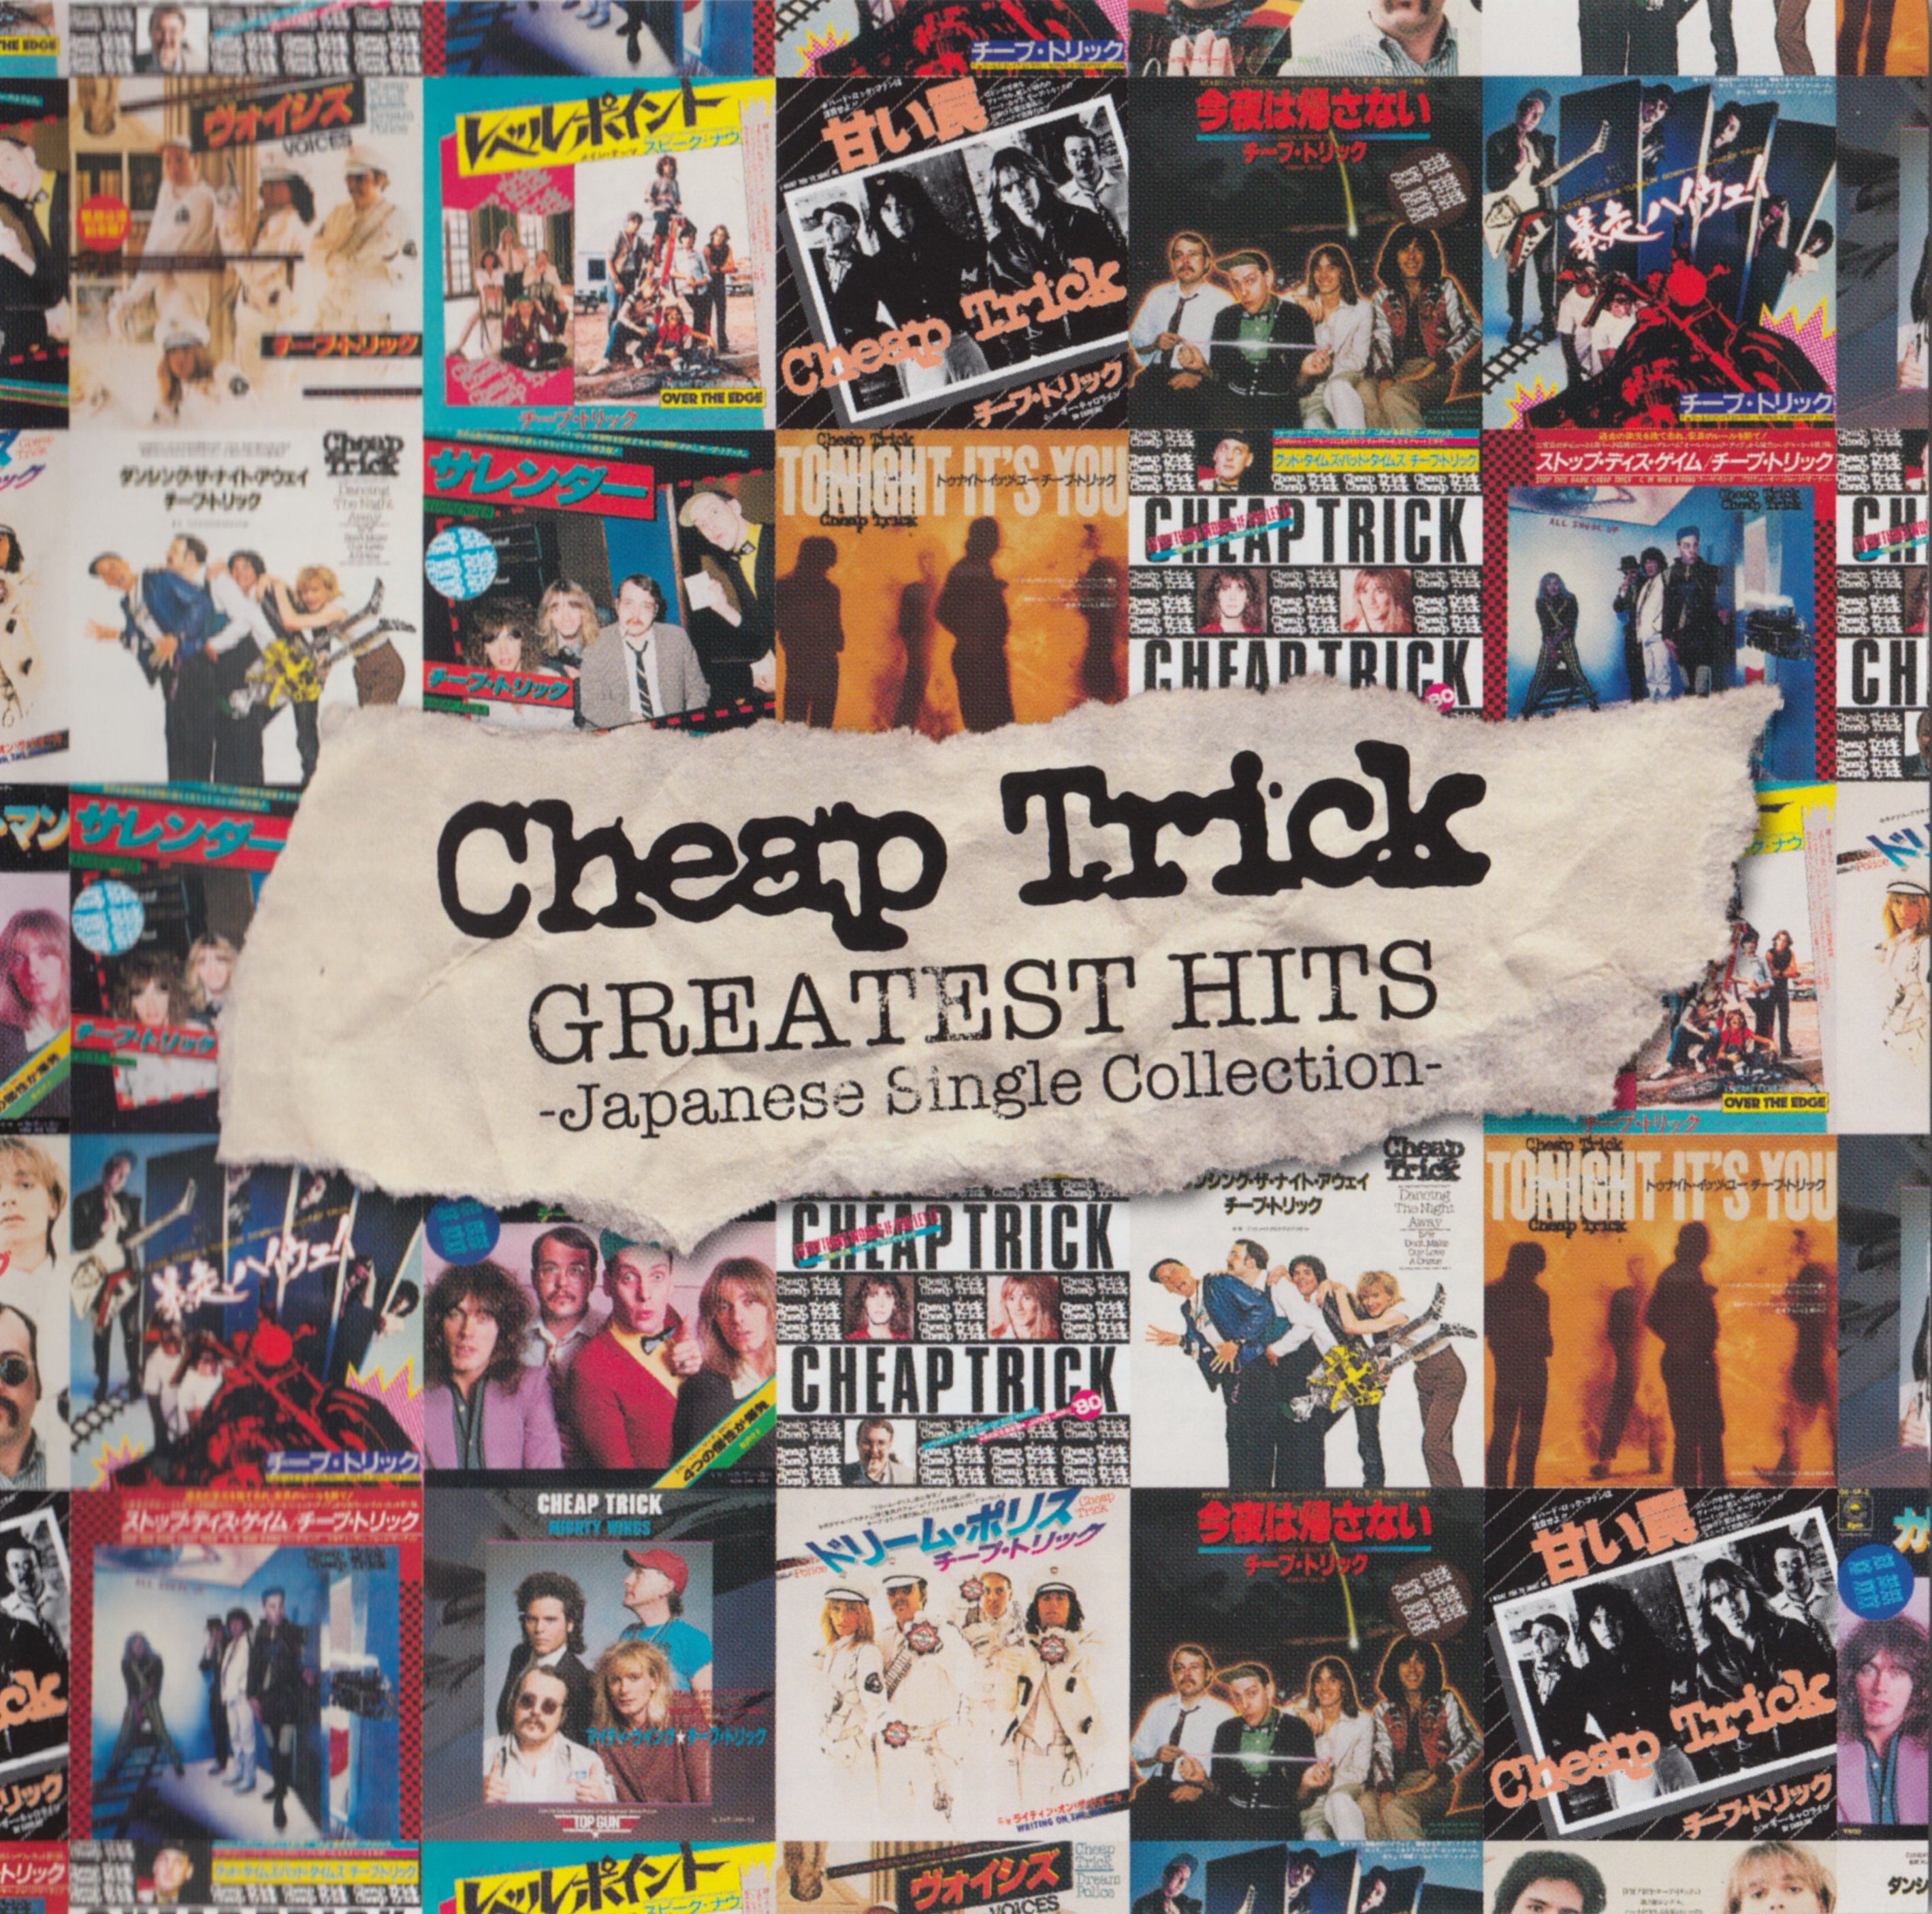 Greatest hits collection. Cheap Trick. Cheap Trick - 2018 - Greatest Hits - Japanese Single collection. Cheap Trick cheap Trick. "Japanese Singles collection".